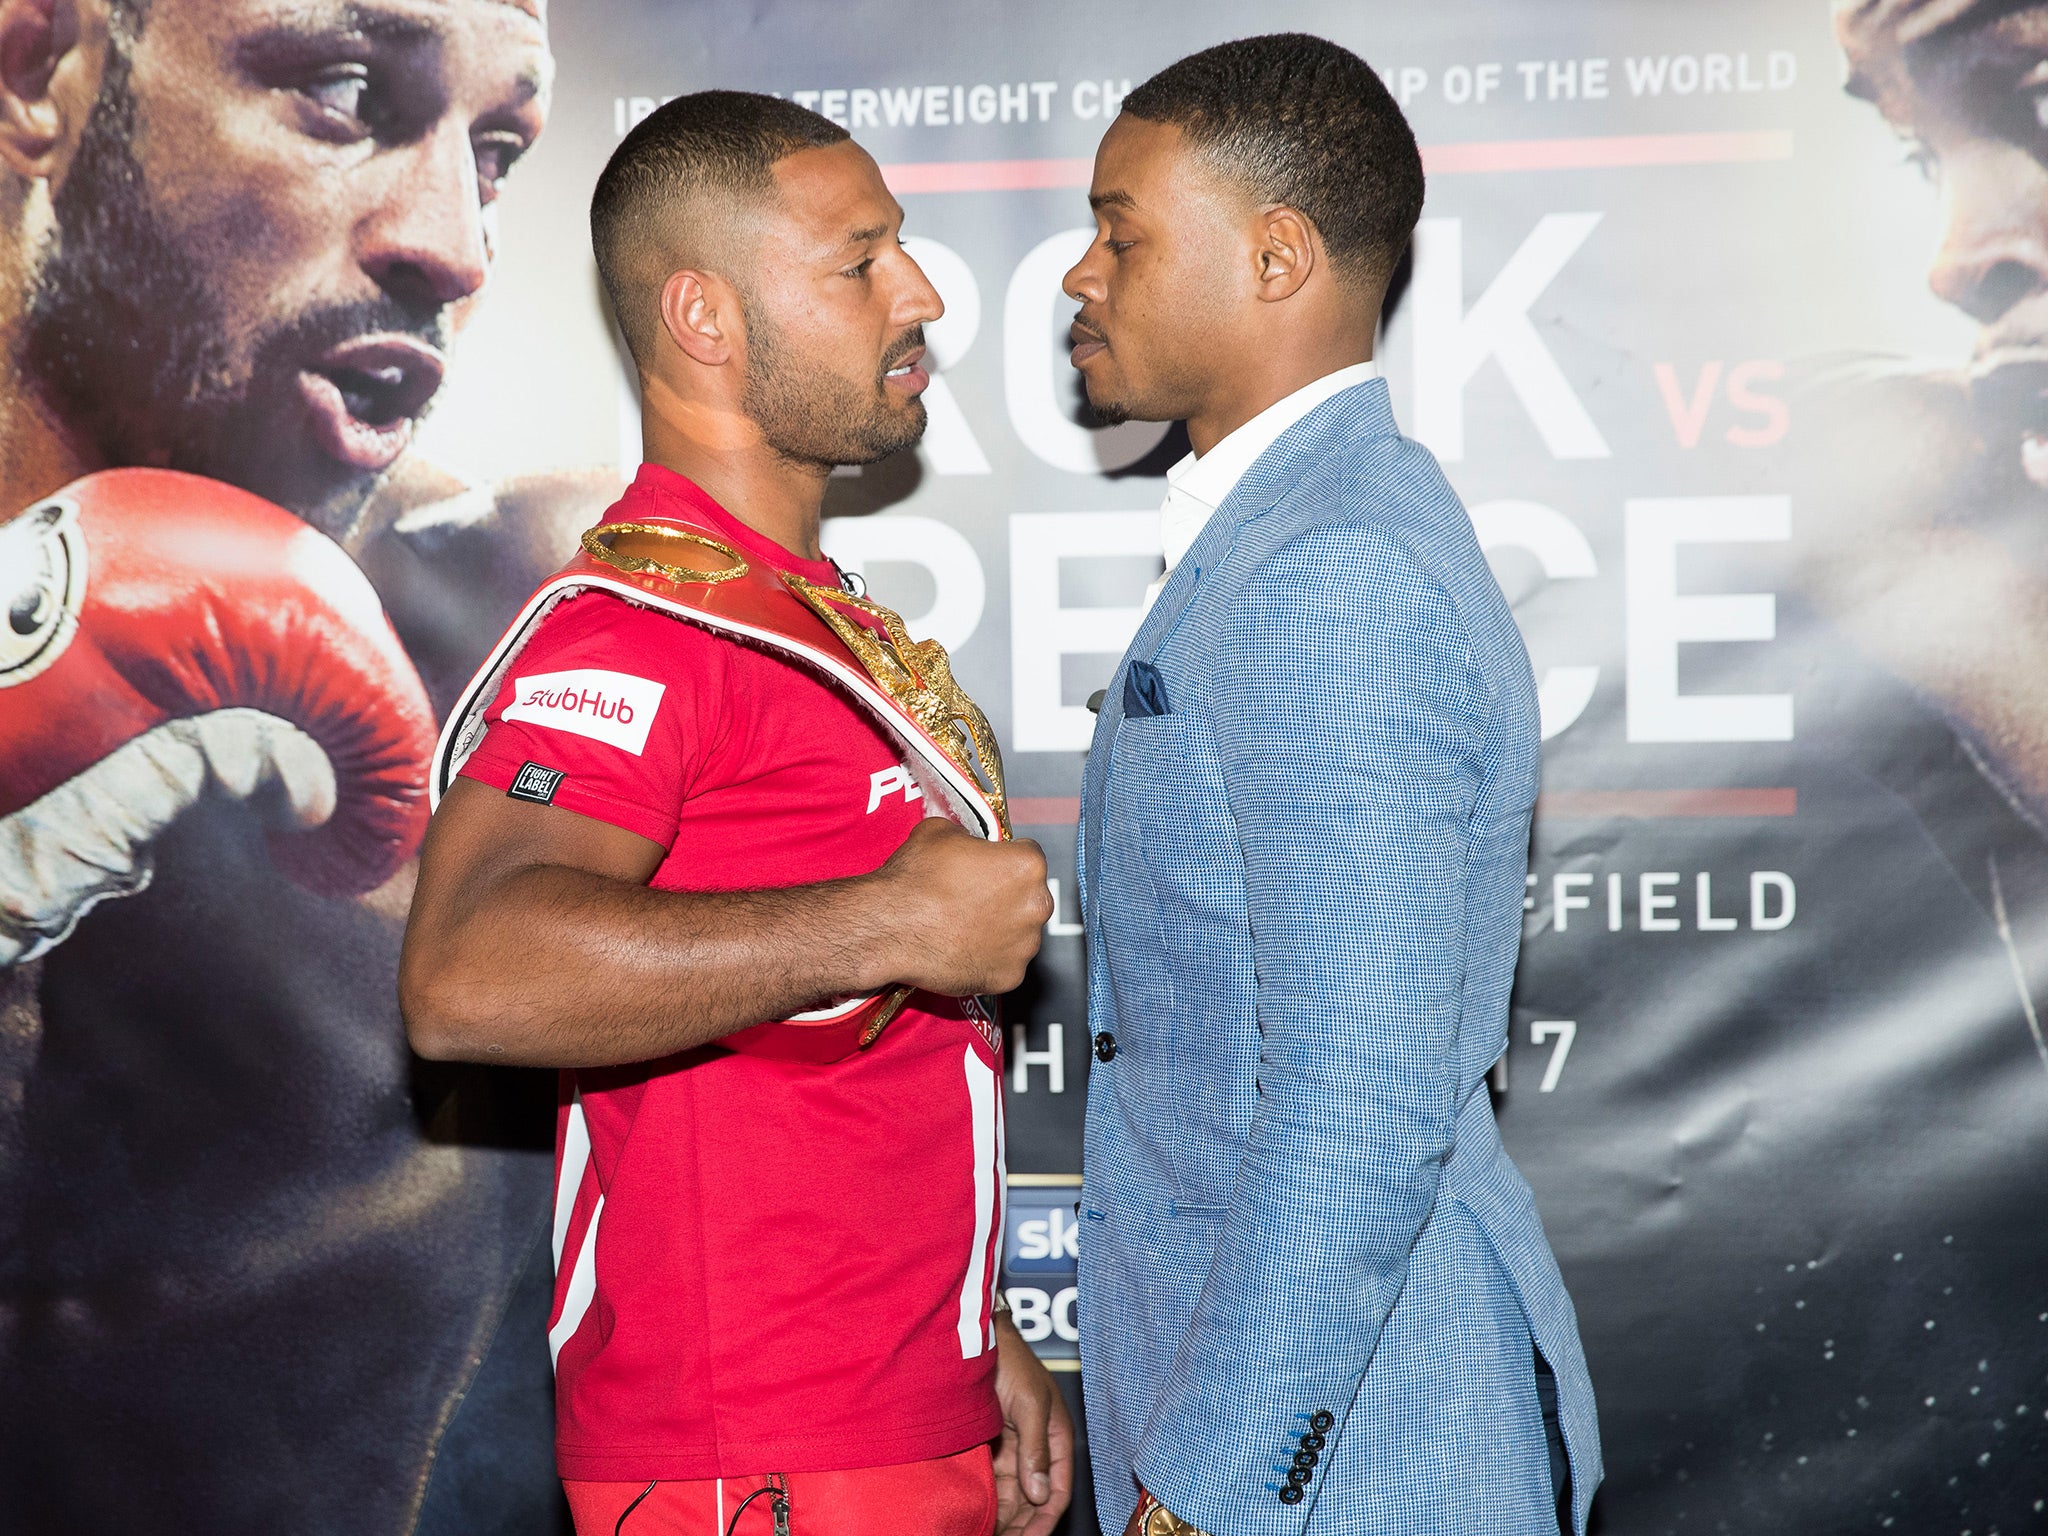 Will Kell Brook's movement around the weight categories cost him?